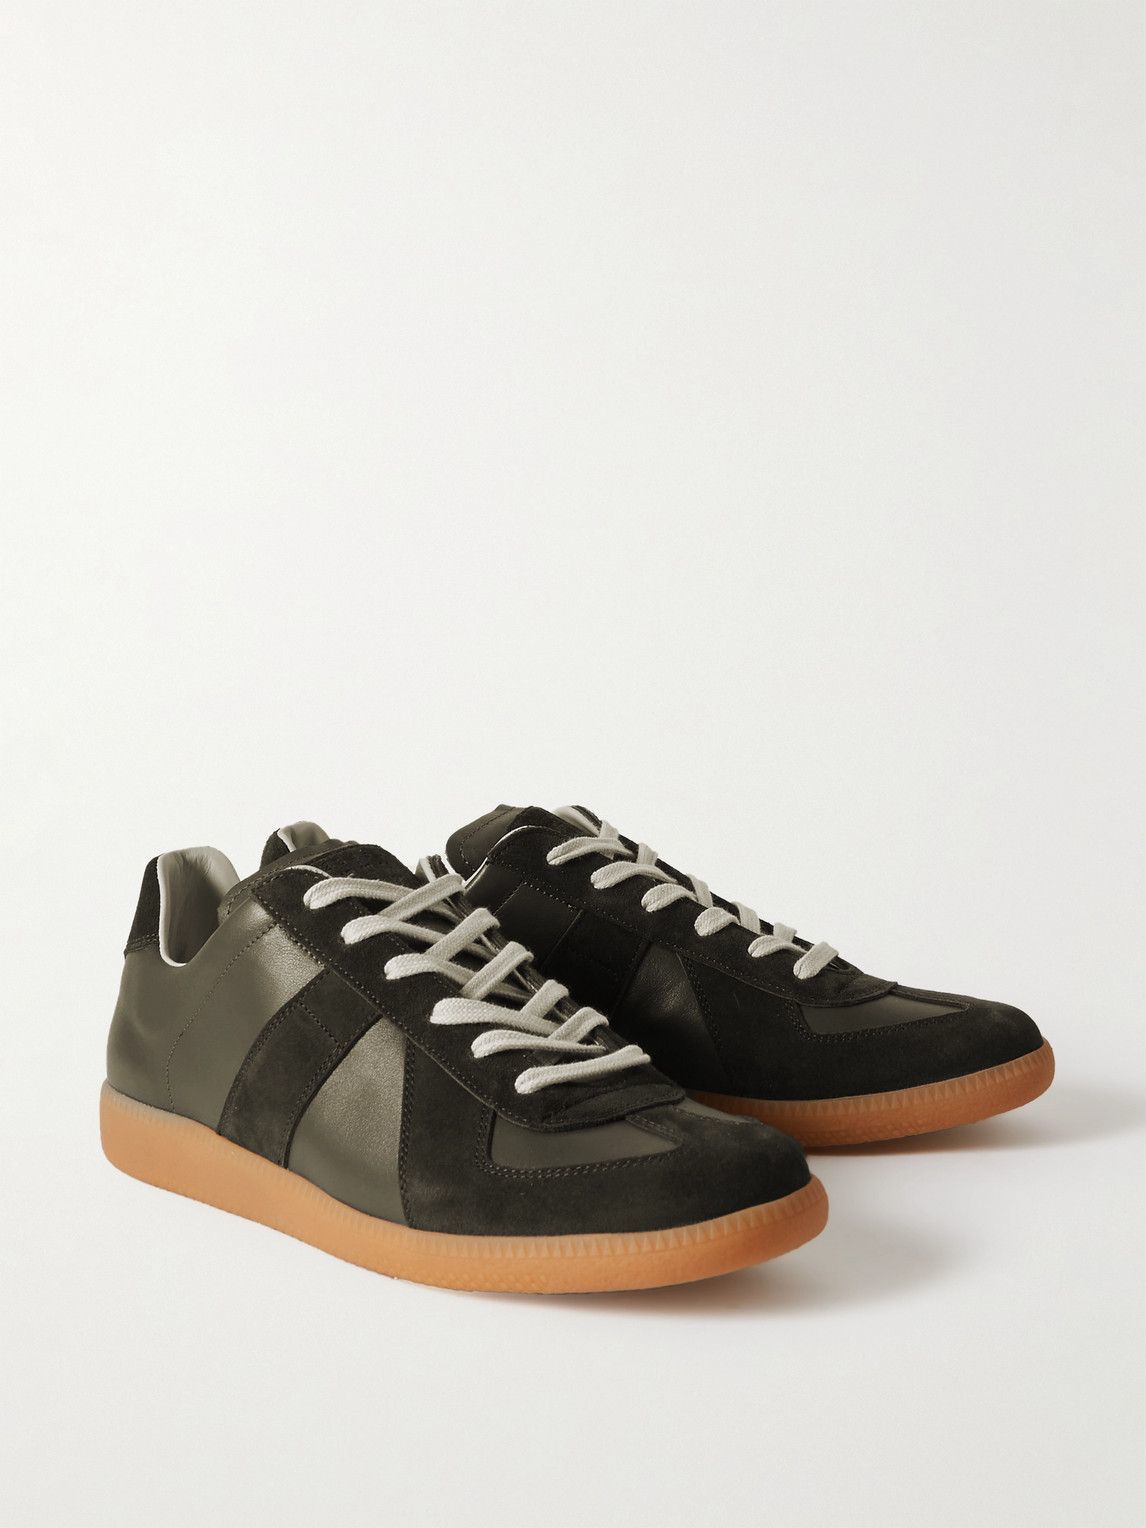 Maison Margiela - Replica Leather and Suede Sneakers - Green Maison ...